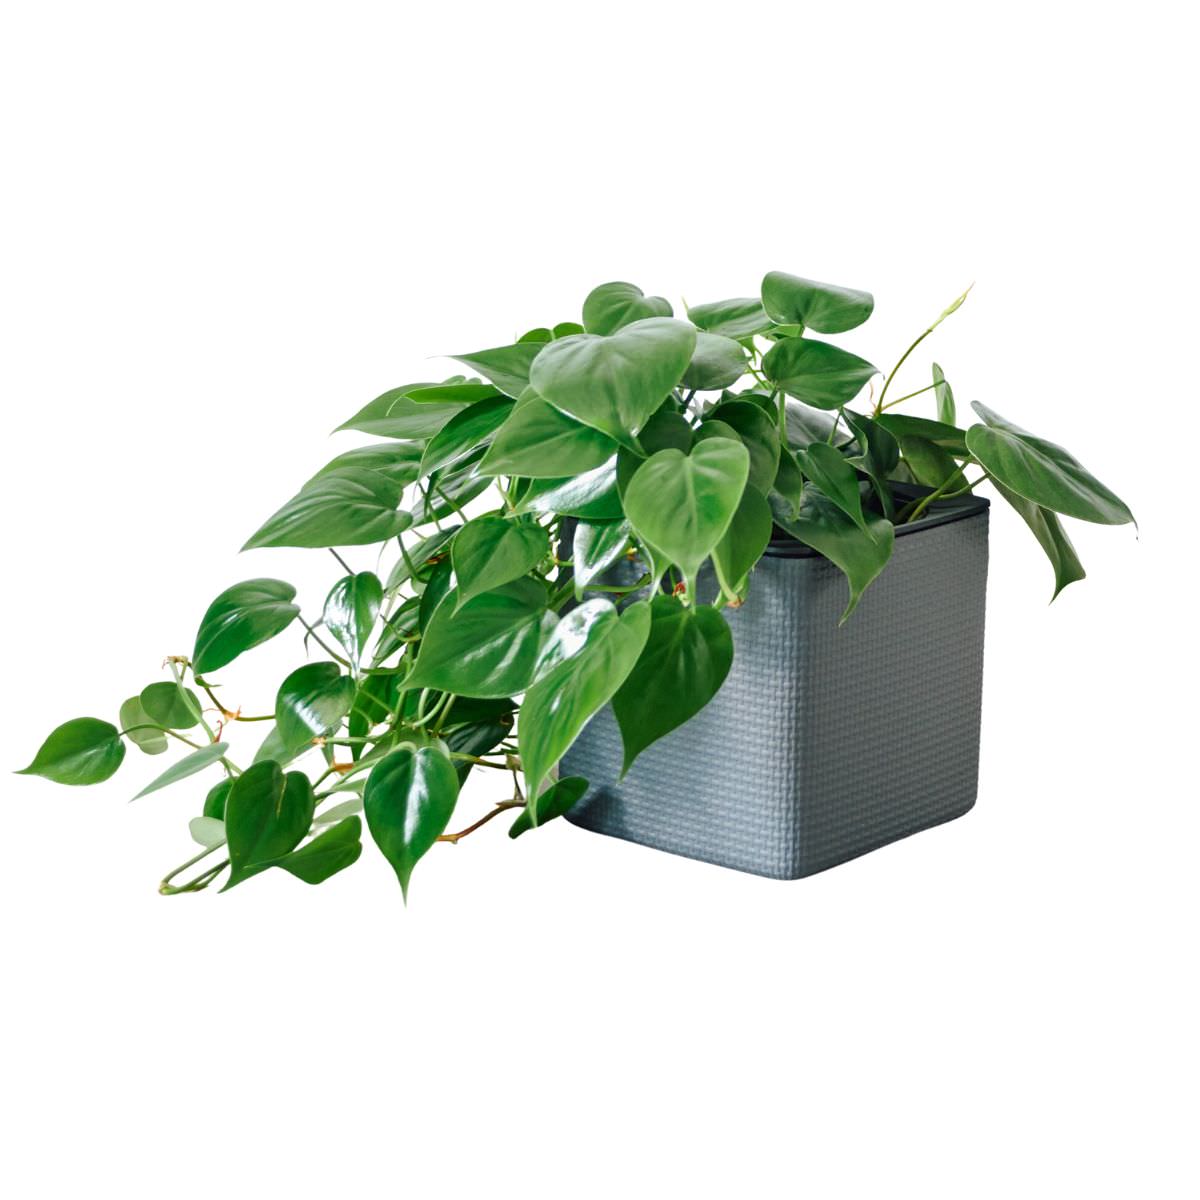 Philodendron Cordatum Placed In Lechuza Cube 16 planter - Slate - My City Plants